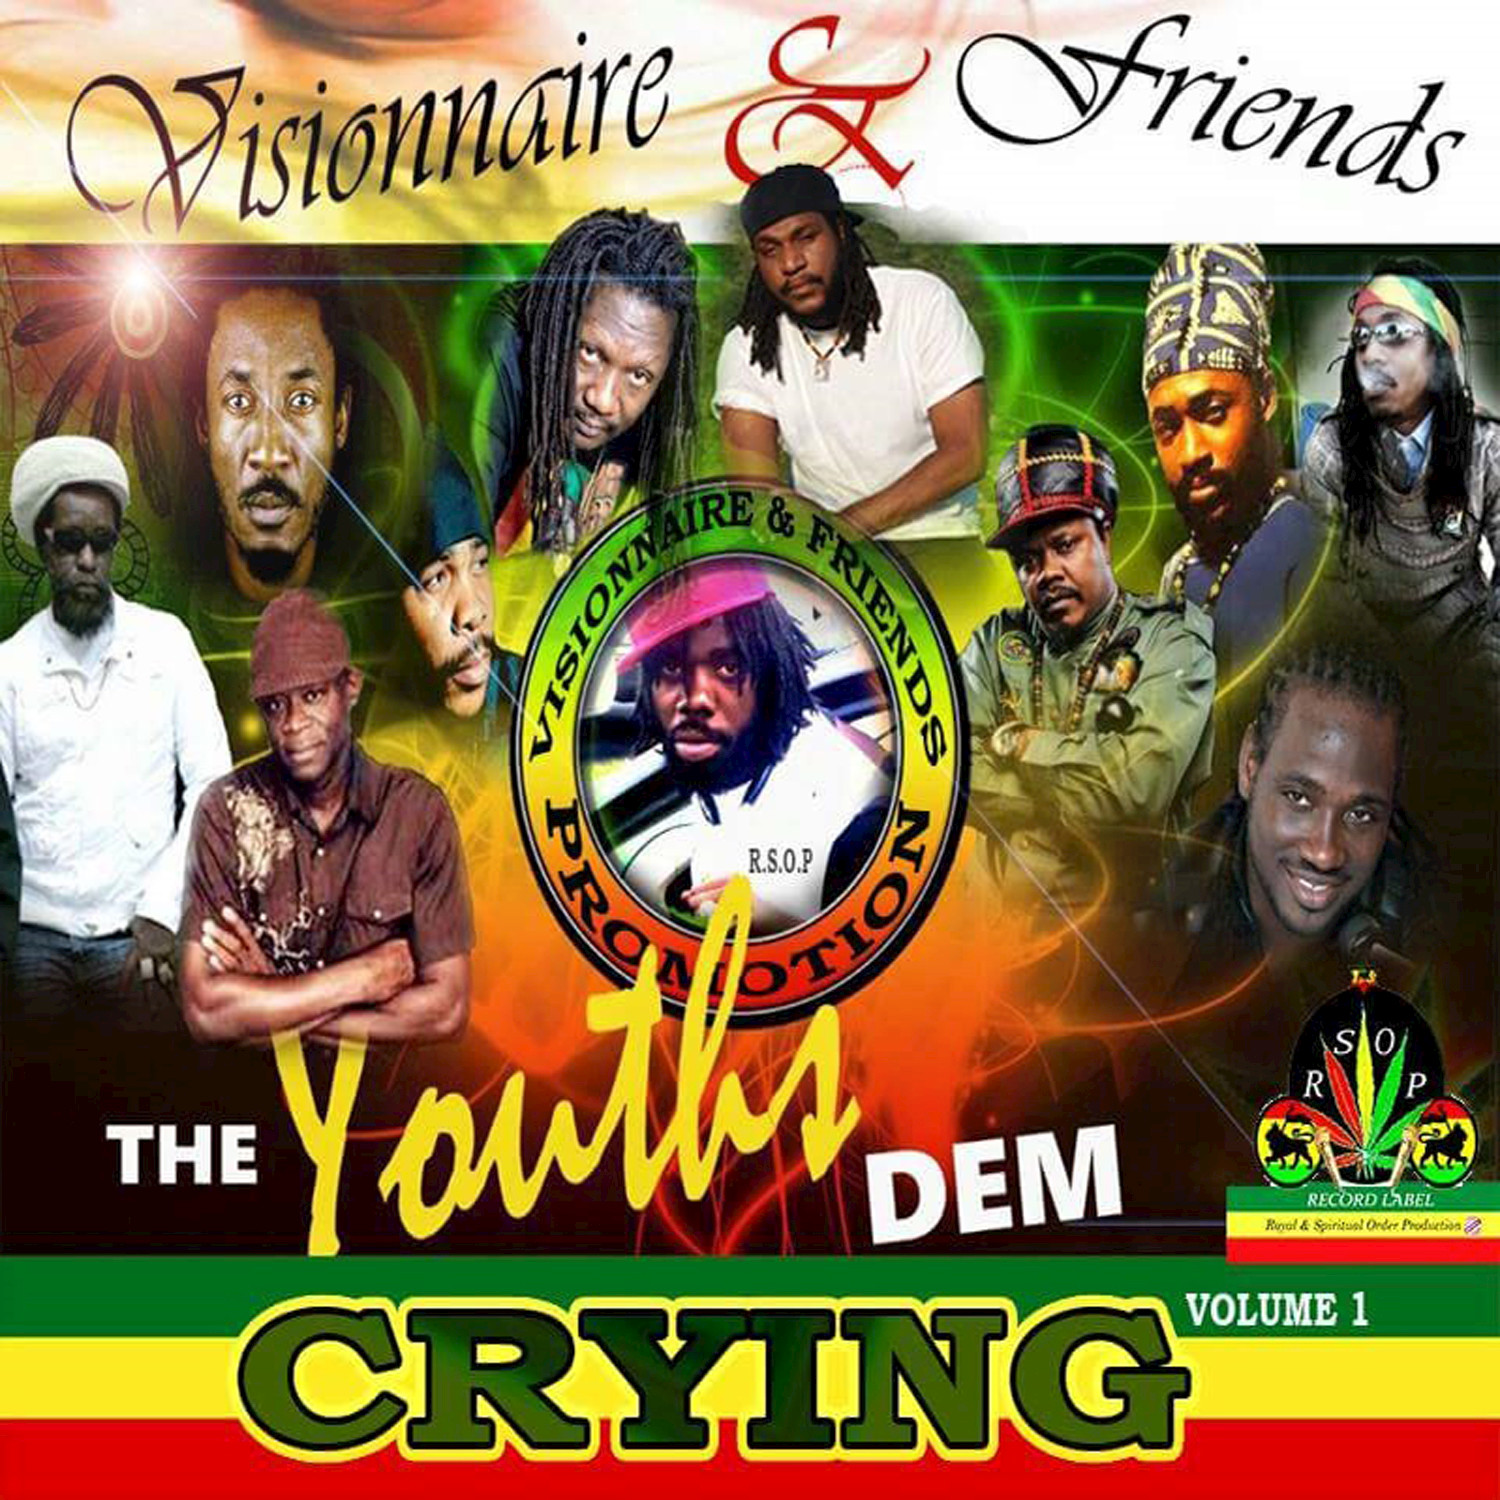 The Youths Dem Crying Version